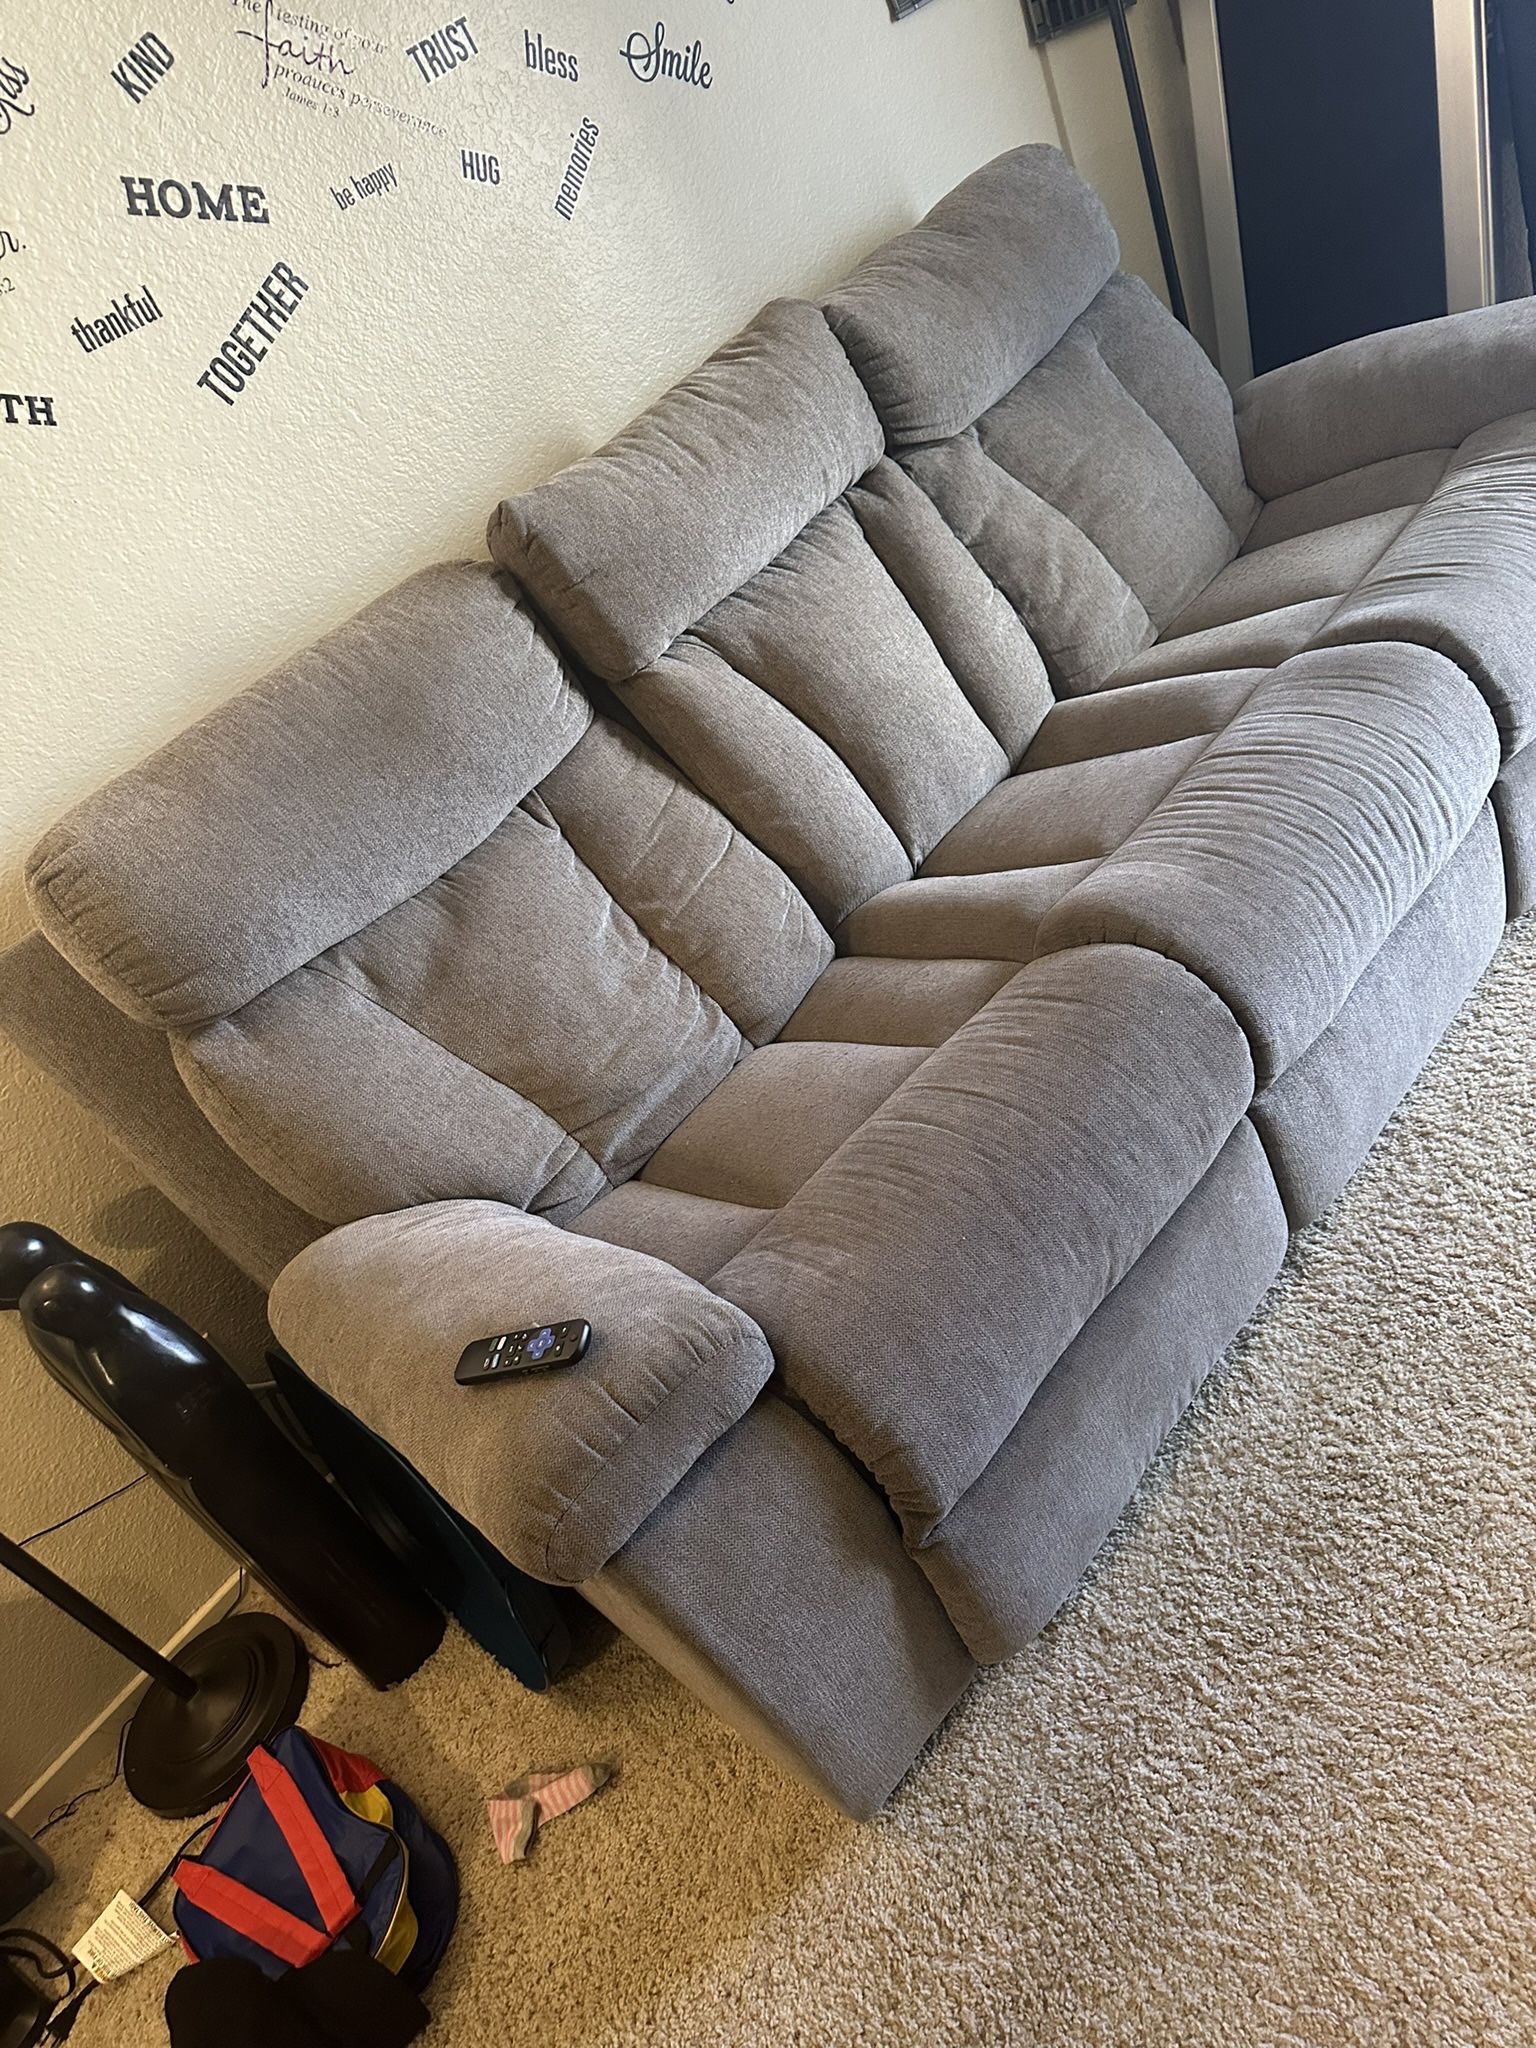 Grey Couches With Table In Middle